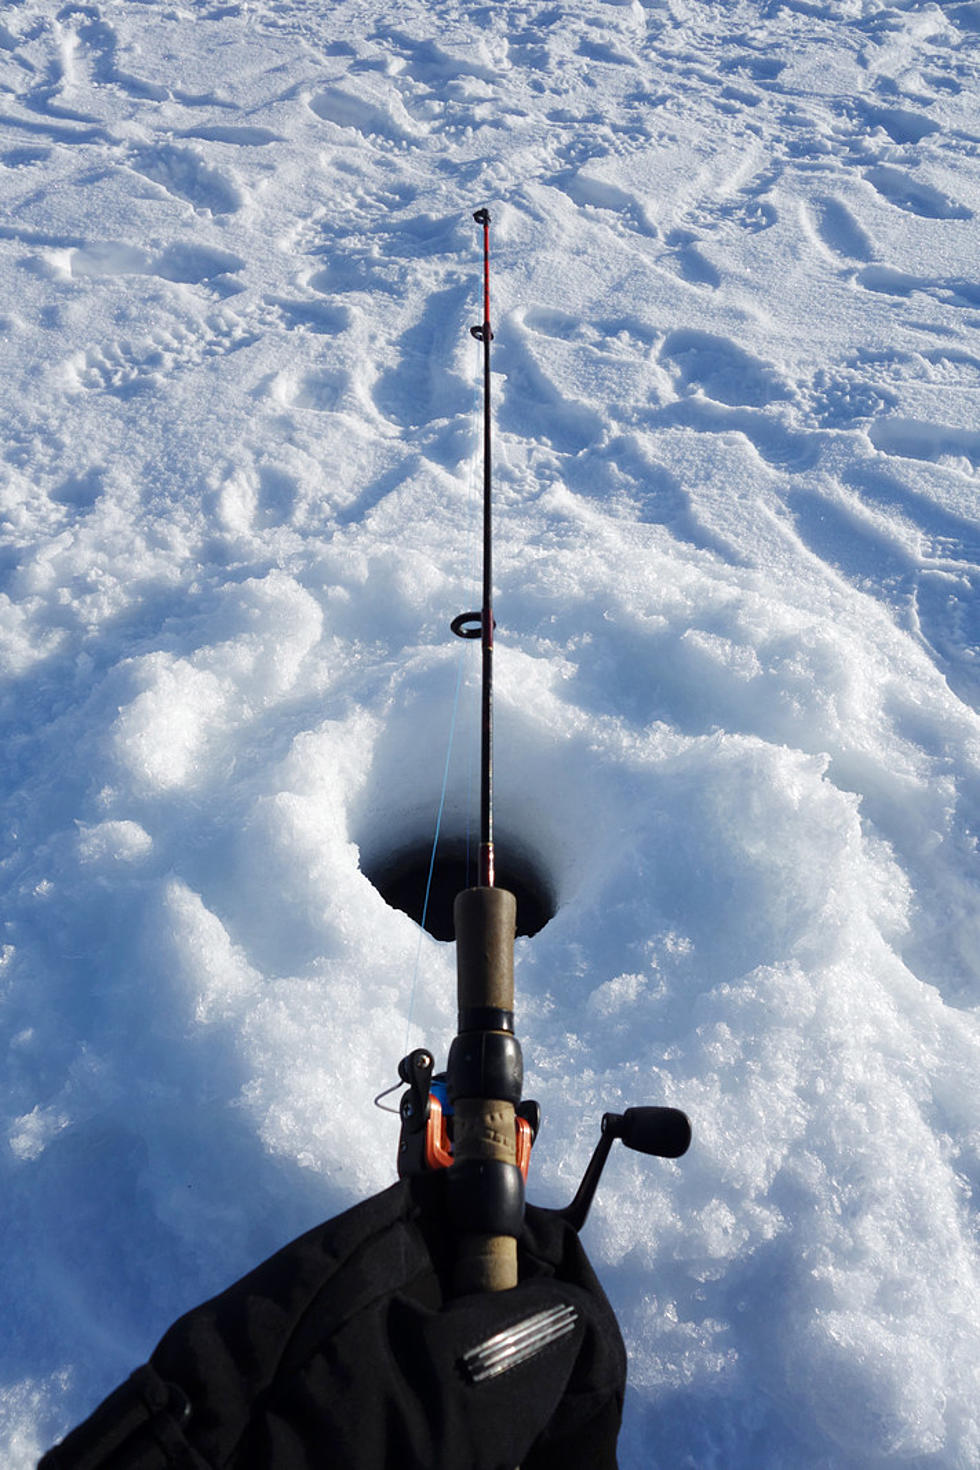 Get Ready For A Free Ice Fishing (No License ) Weekend